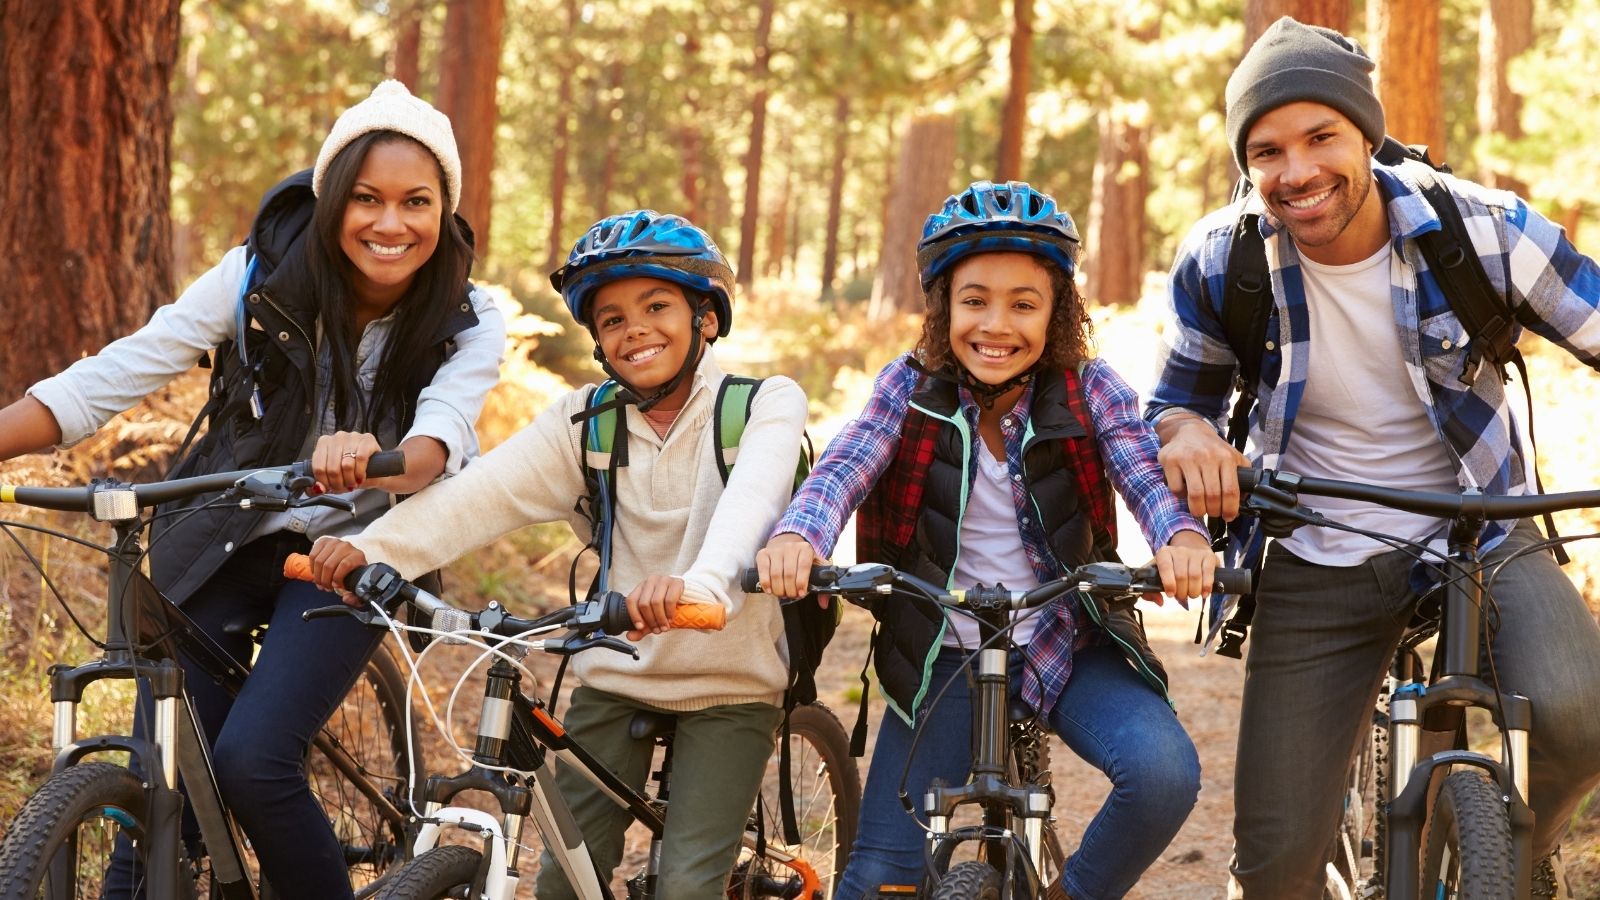 Cycling keeps children active